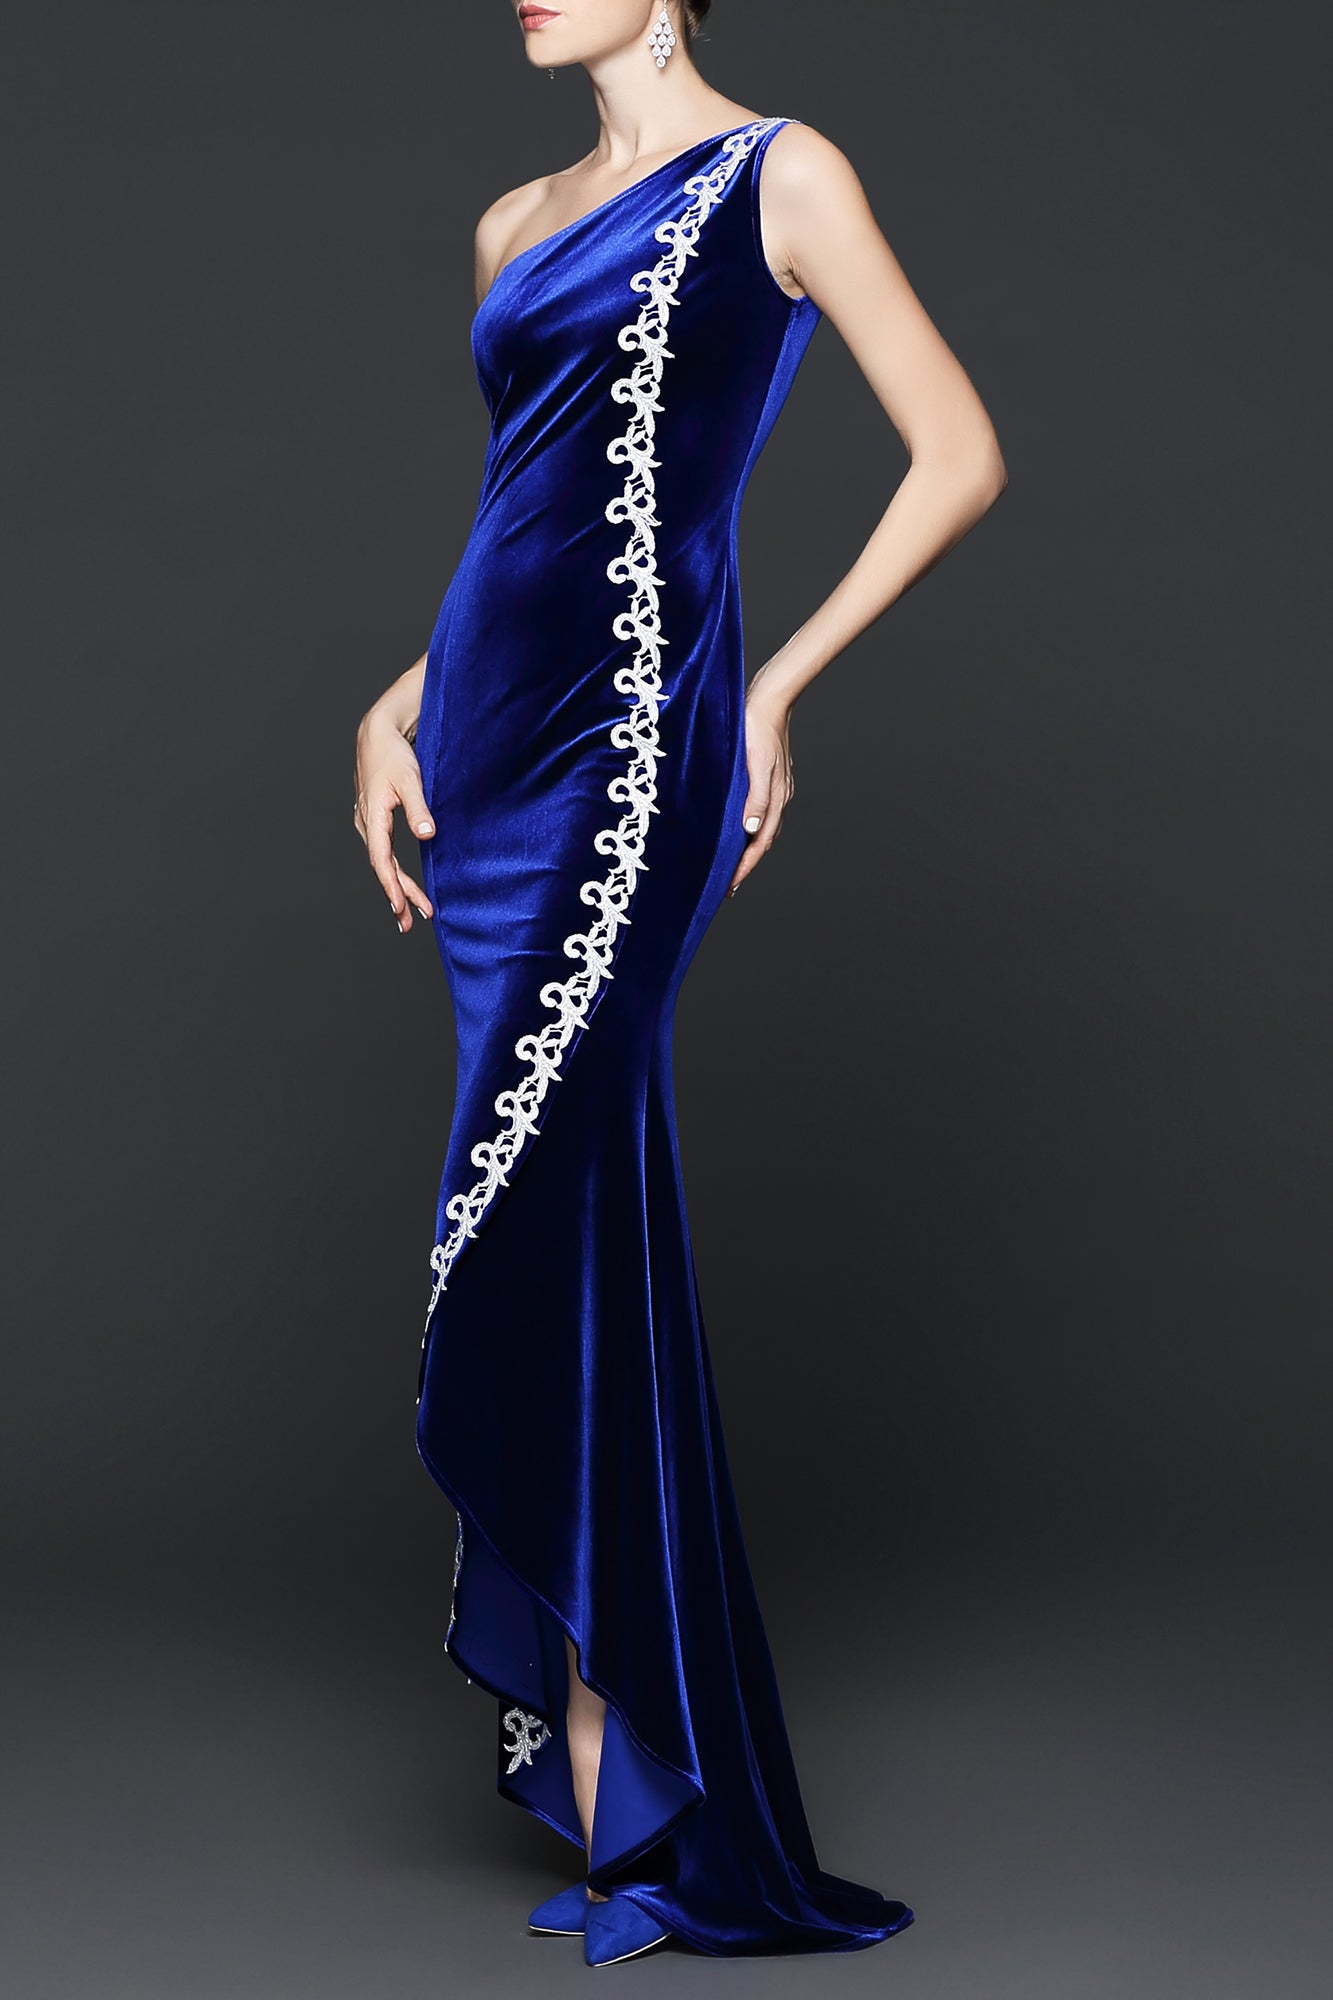 DL CHIC FOREVER LOVED SIGNATURE SOFIA FUSION GOWN